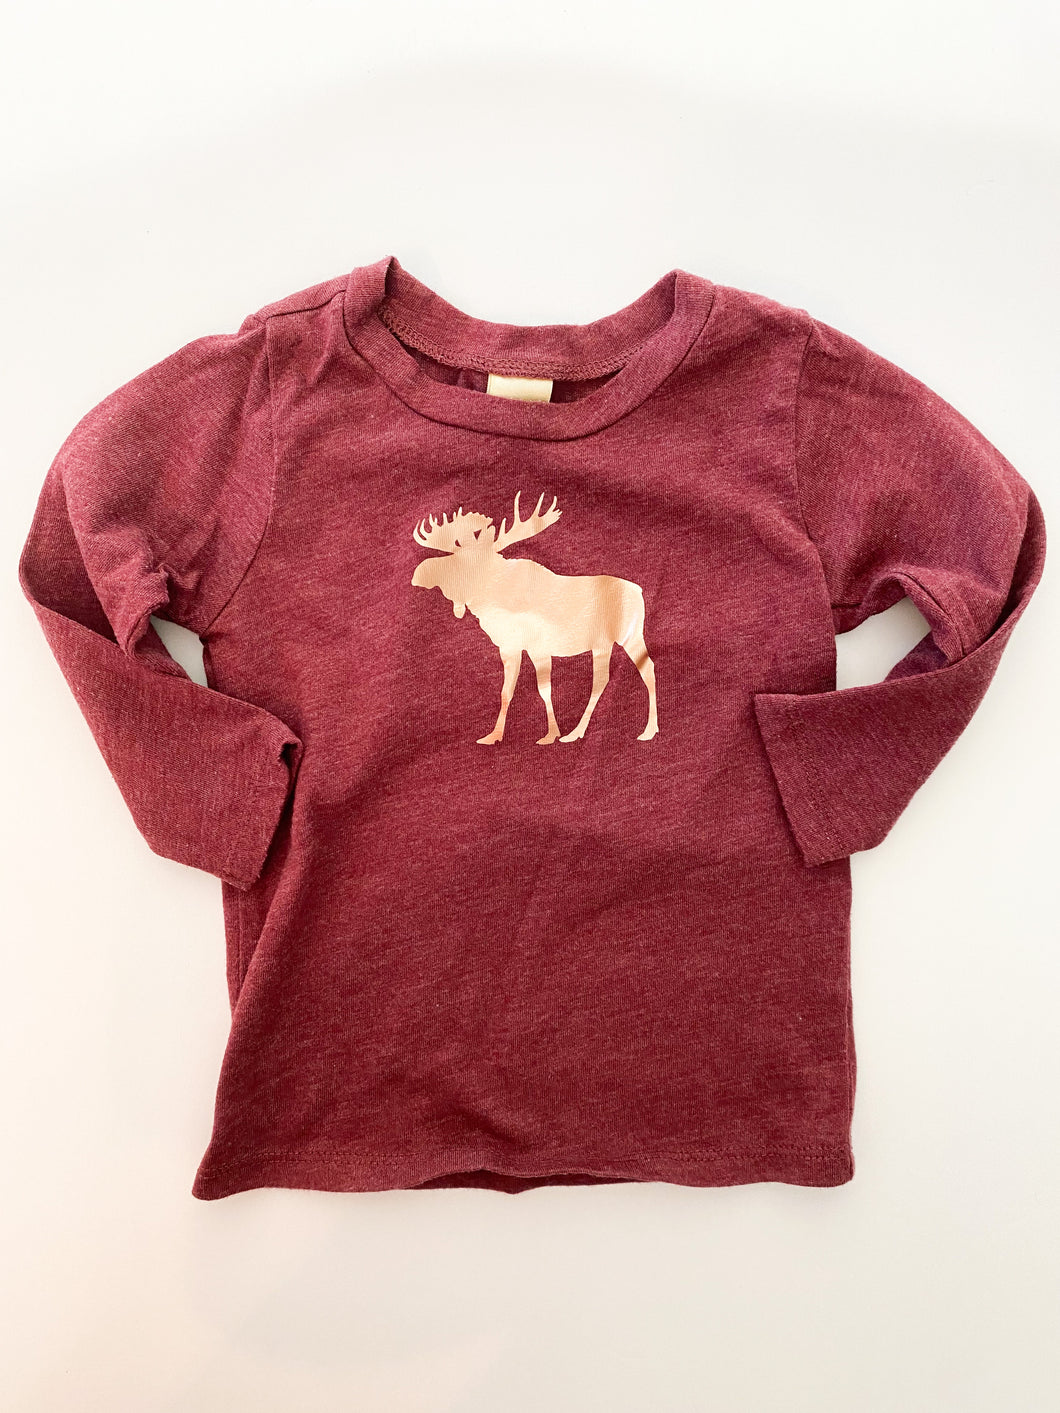 6m Love of little Rose Gold Moose on Maroon ( like new )